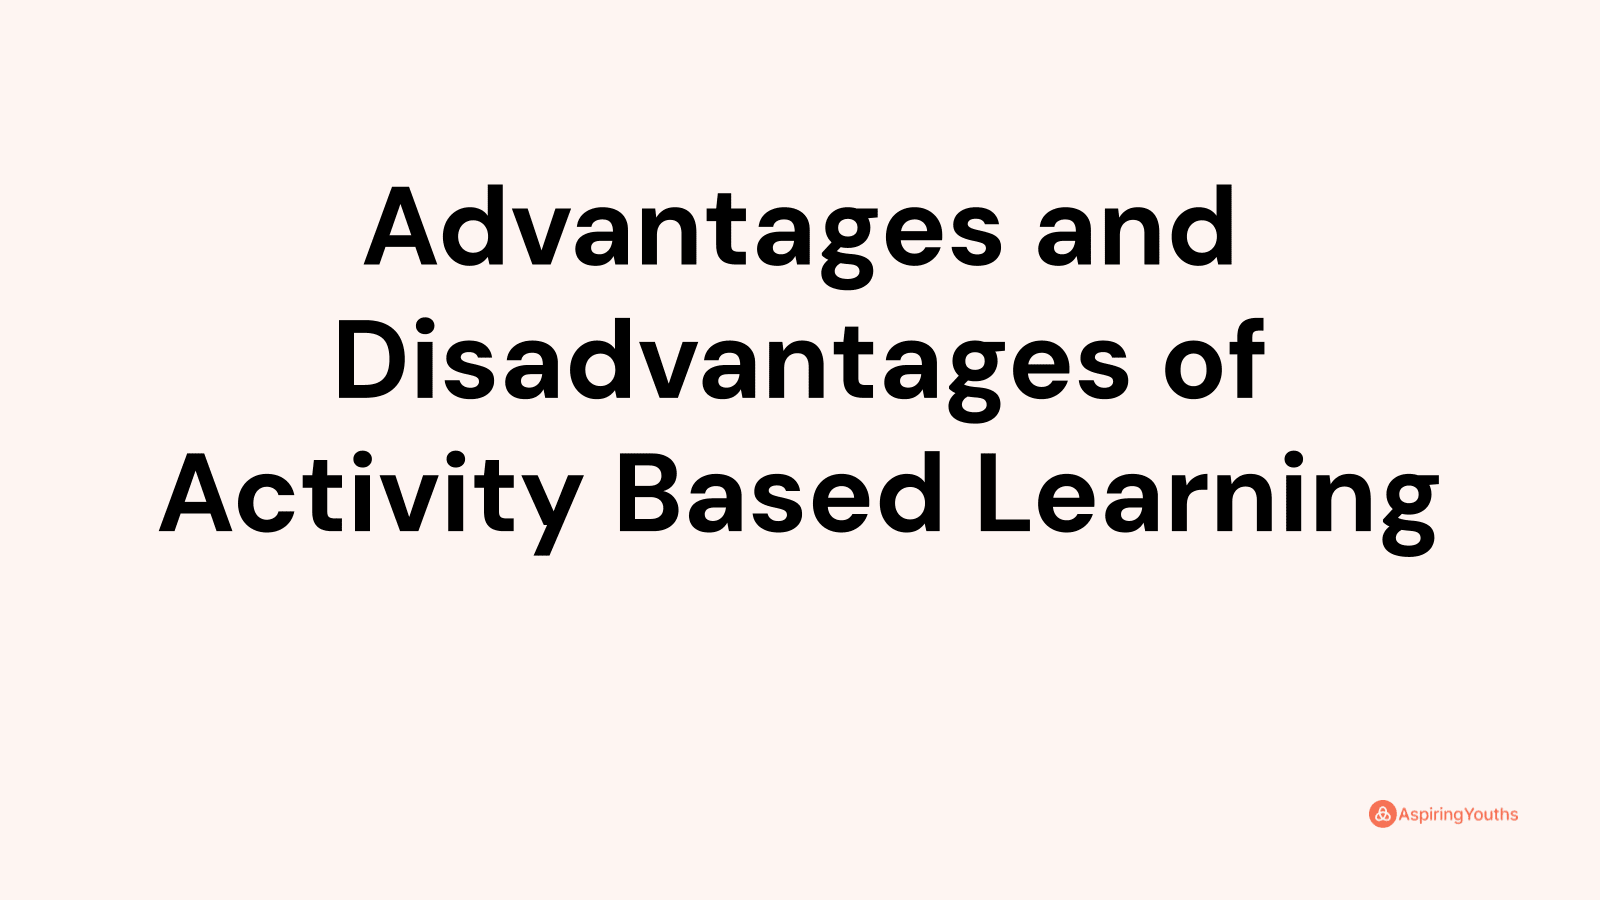 Advantages and disadvantages of Activity Based Learning